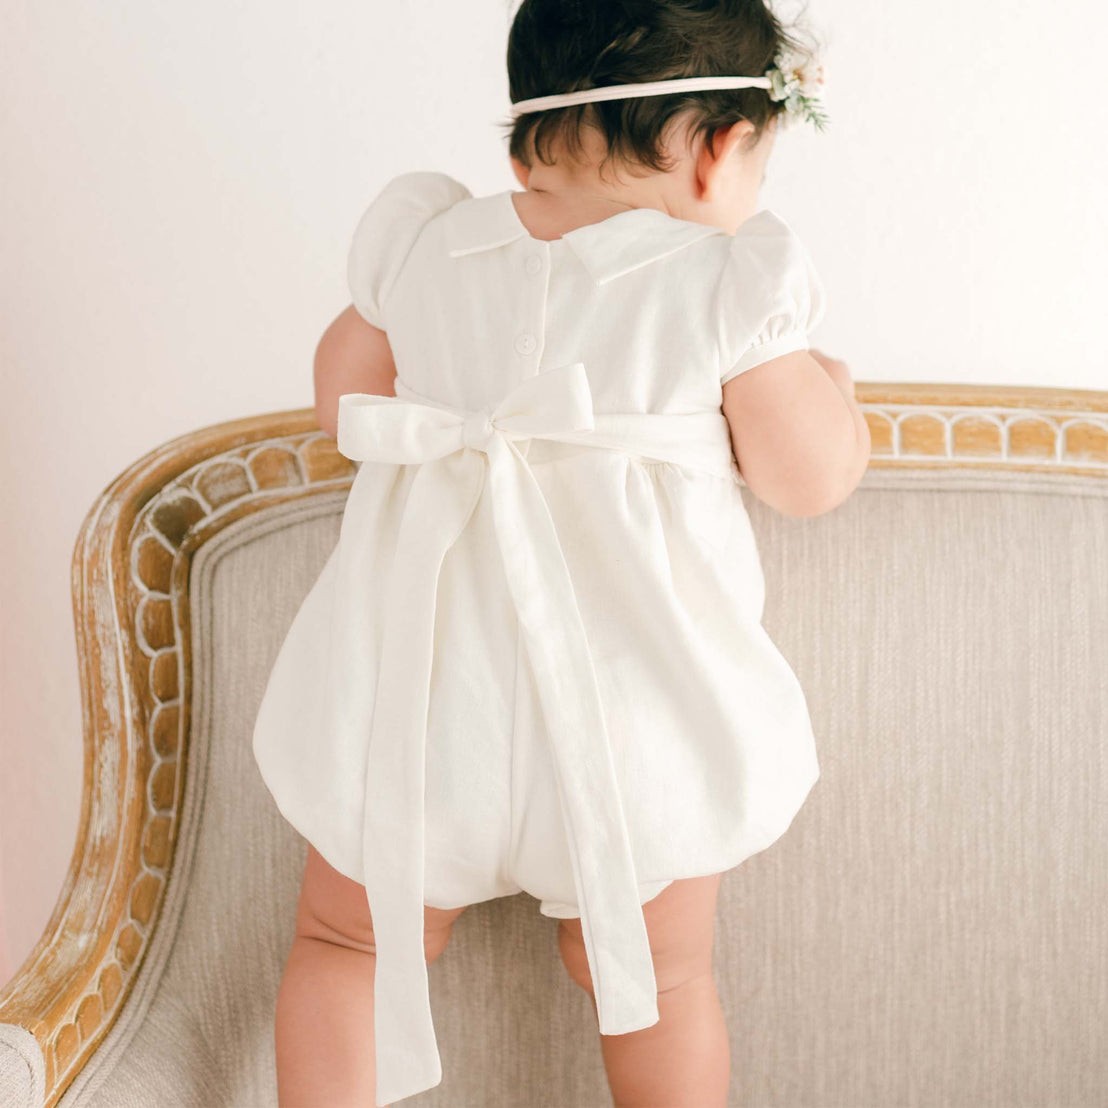 A baby in an Emma Bubble Romper with a bow on the back stands facing away from the camera, leaning on an ornate, vintage chair. A delicate floral headband adorns the baby's head.